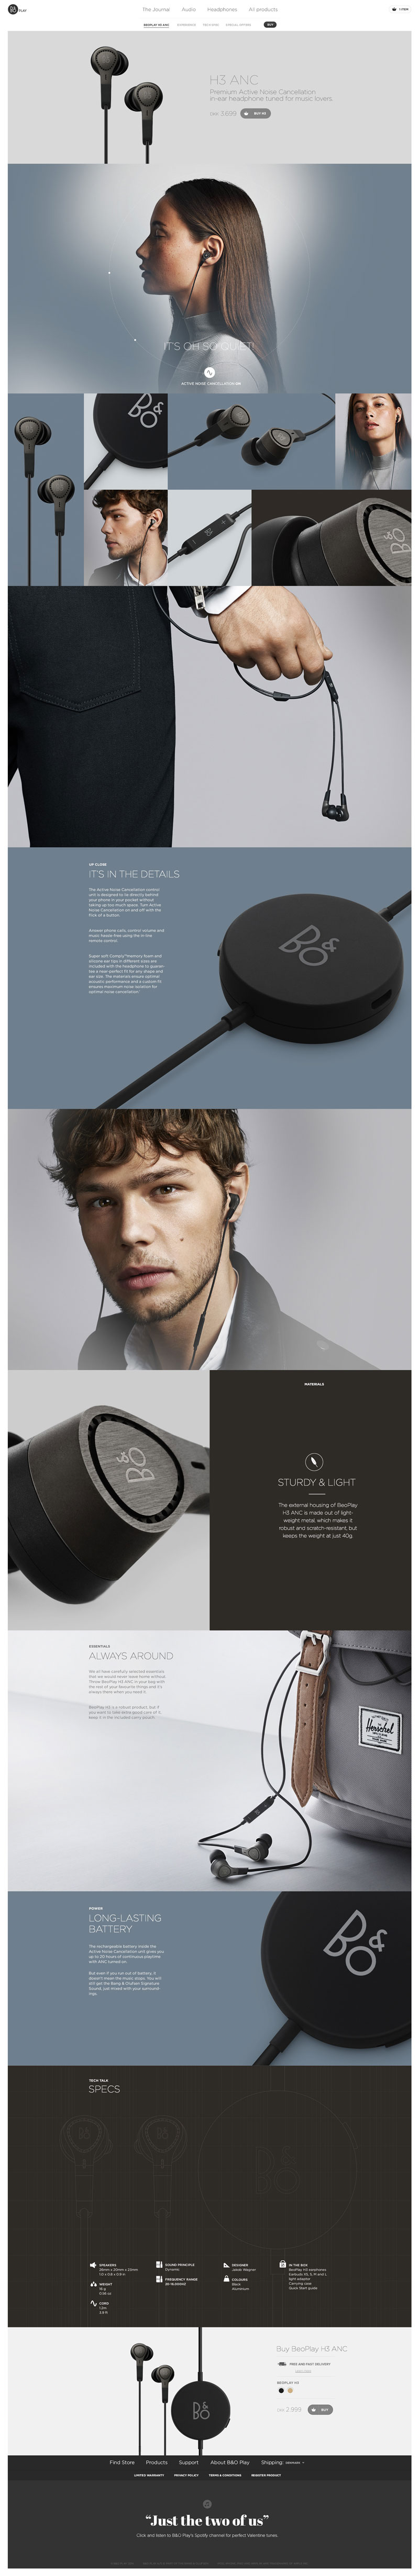 Product BeoPlay H3 Web Design Inspiration